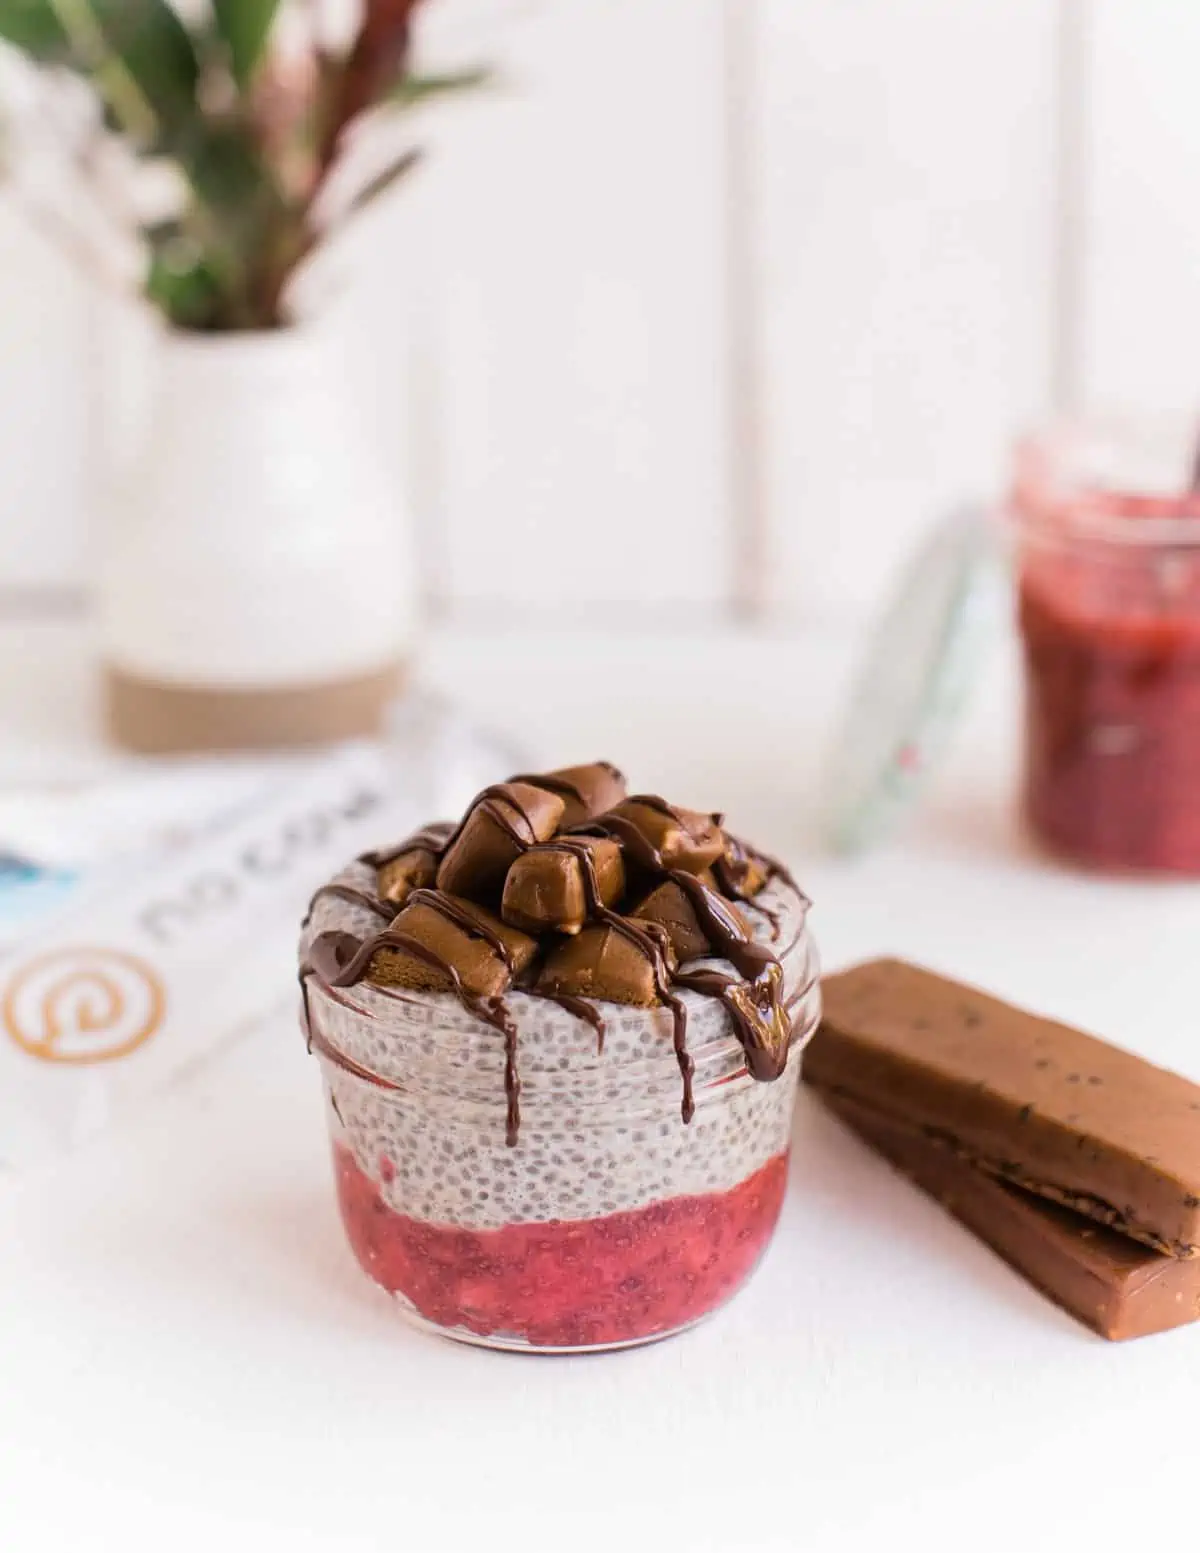 No Cow vegan protein bars served over a chia pudding parfait.